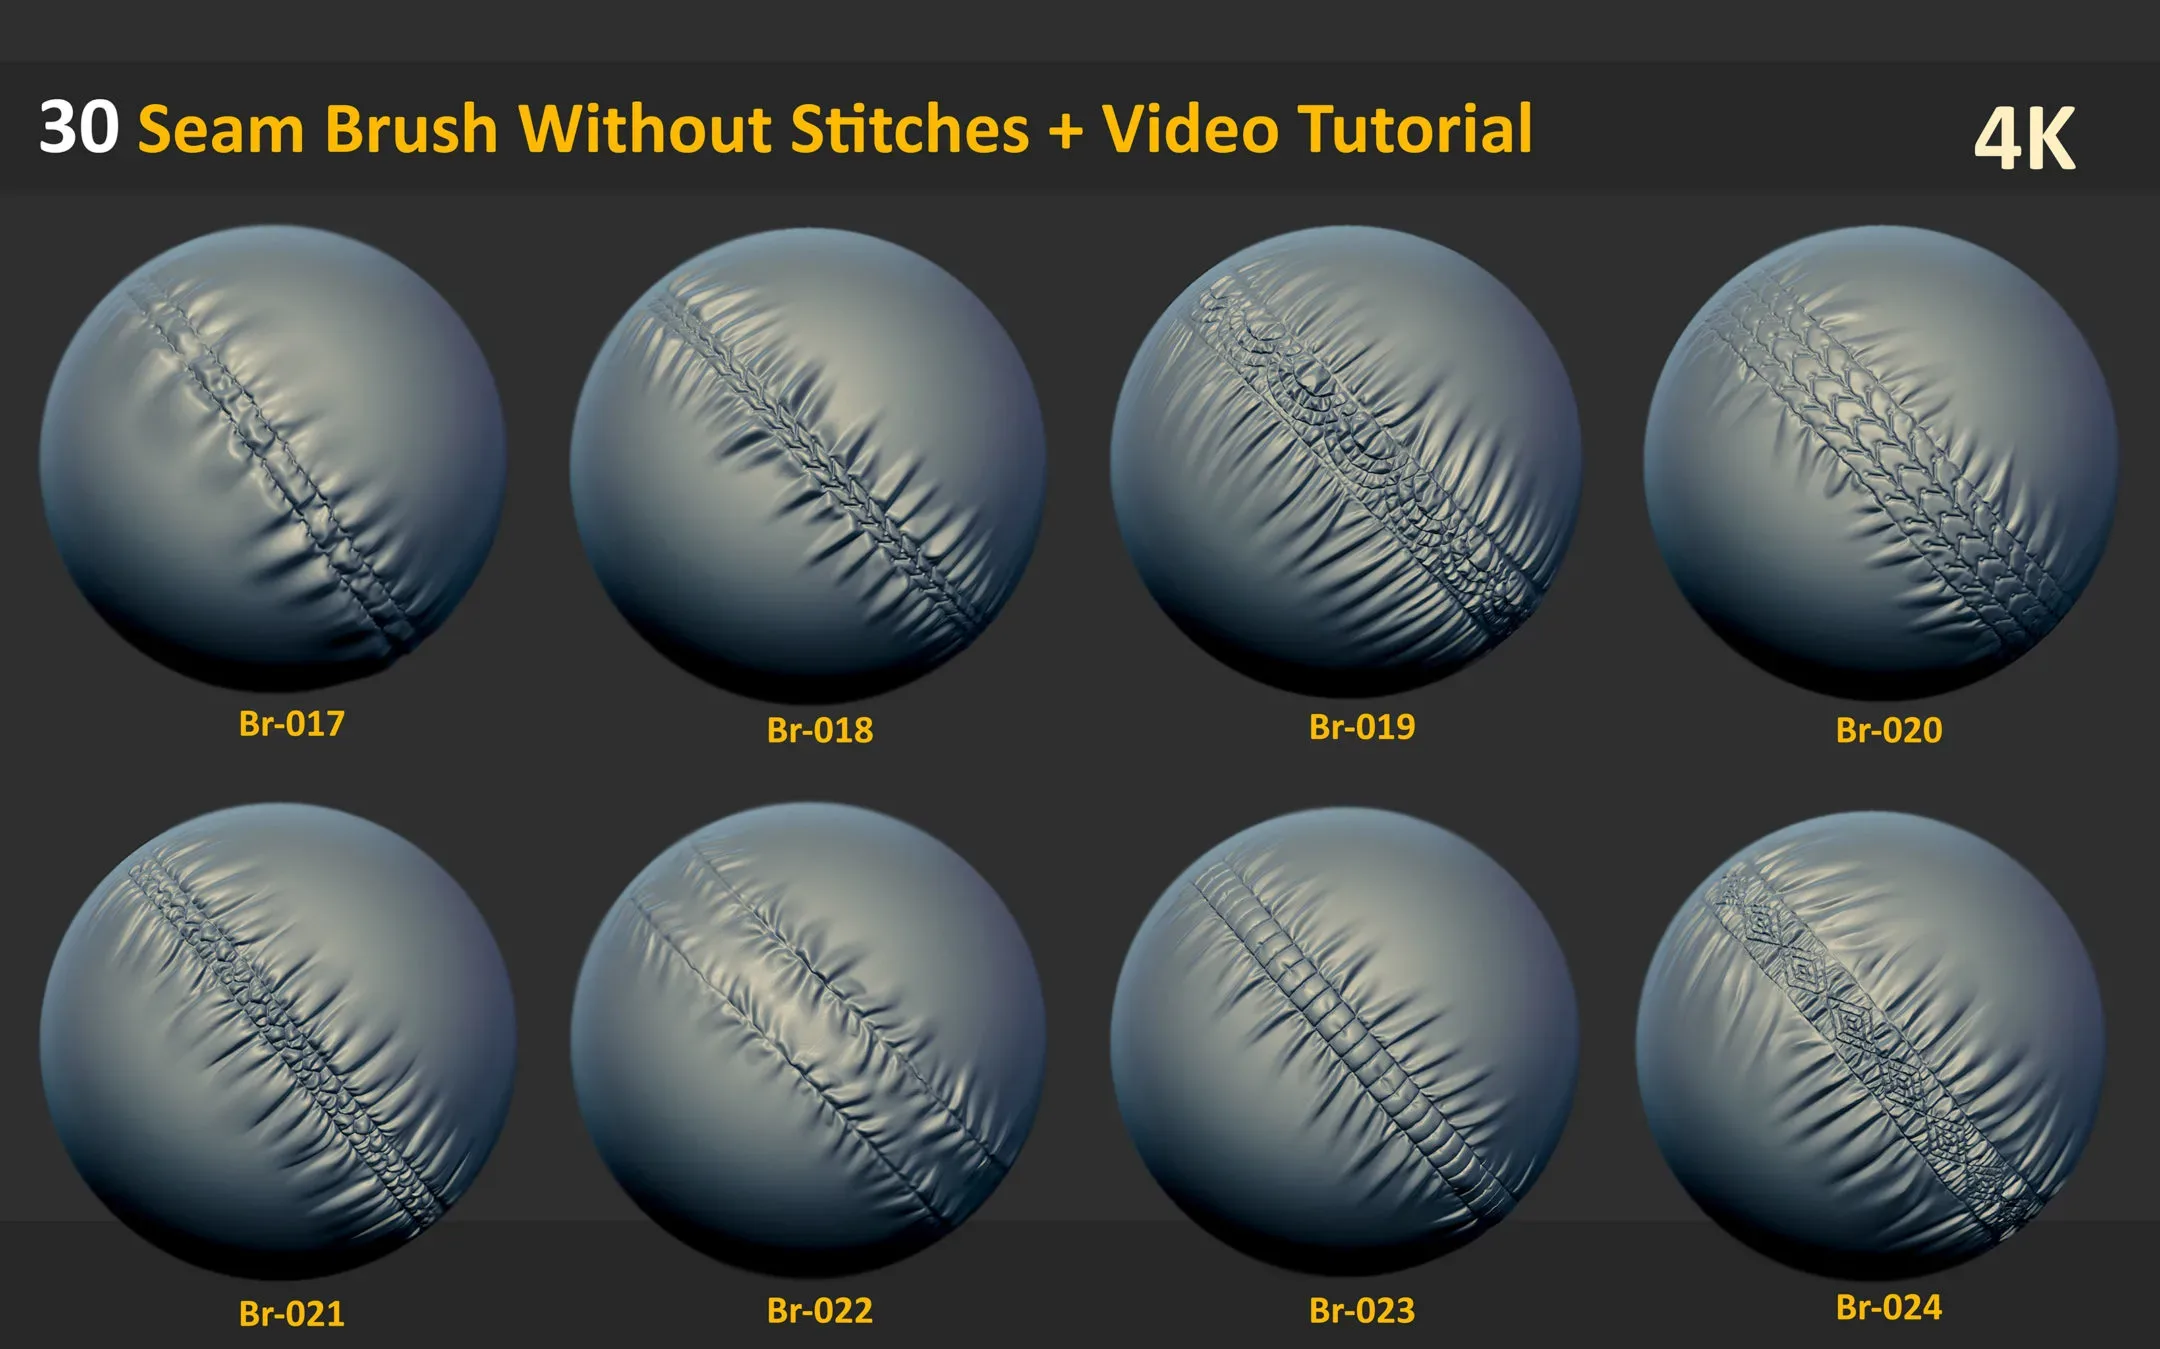 30 Seam Brush Without Stitches + Video Tutorial